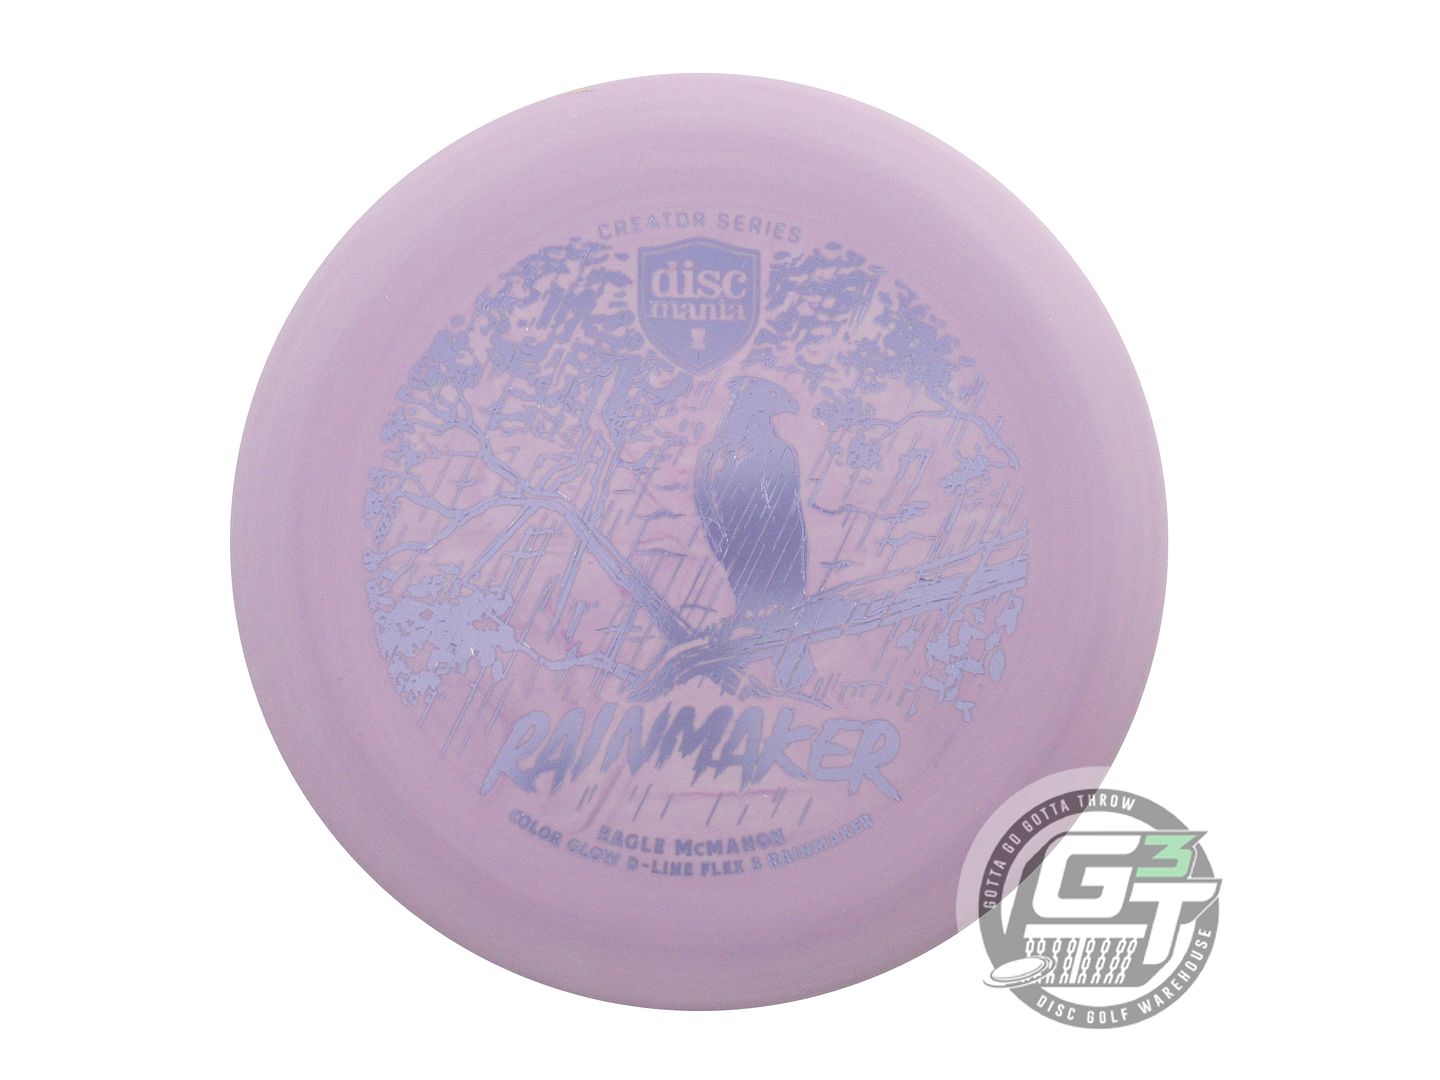 Discmania Limited Edition Triumph Series Eagle McMahon 2023 Putting World Champion Color Glow D-Line Flex 3 Rainmaker Putter Golf Disc (Individually Listed)